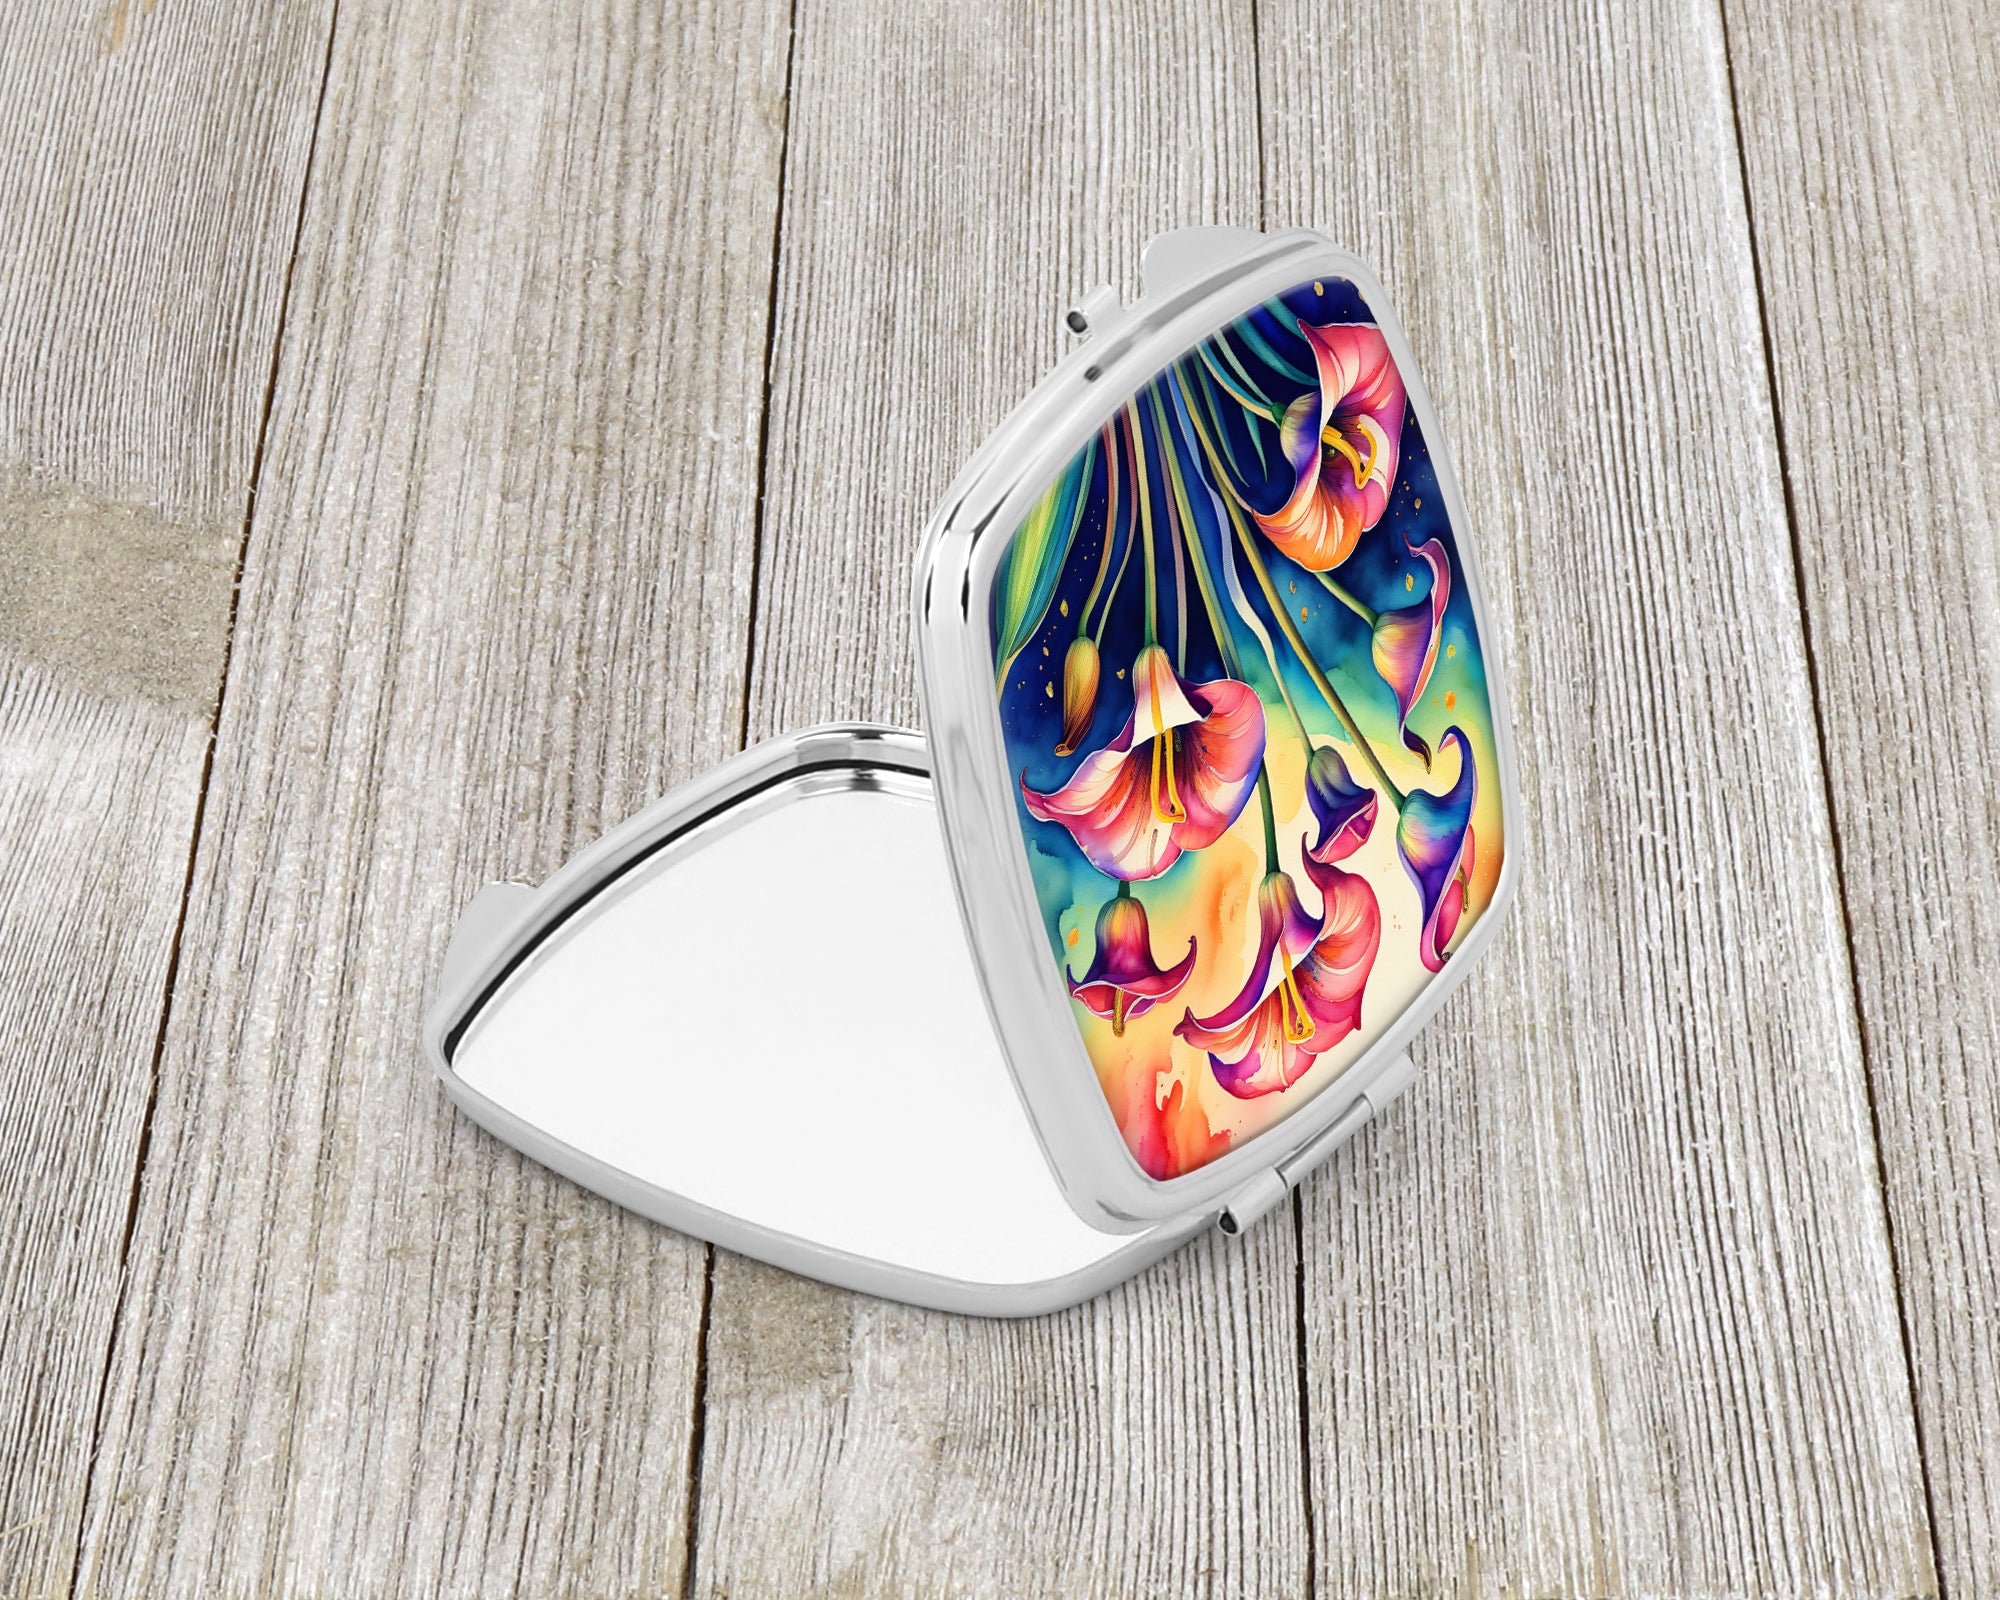 Buy this Colorful Calla Lilies Compact Mirror